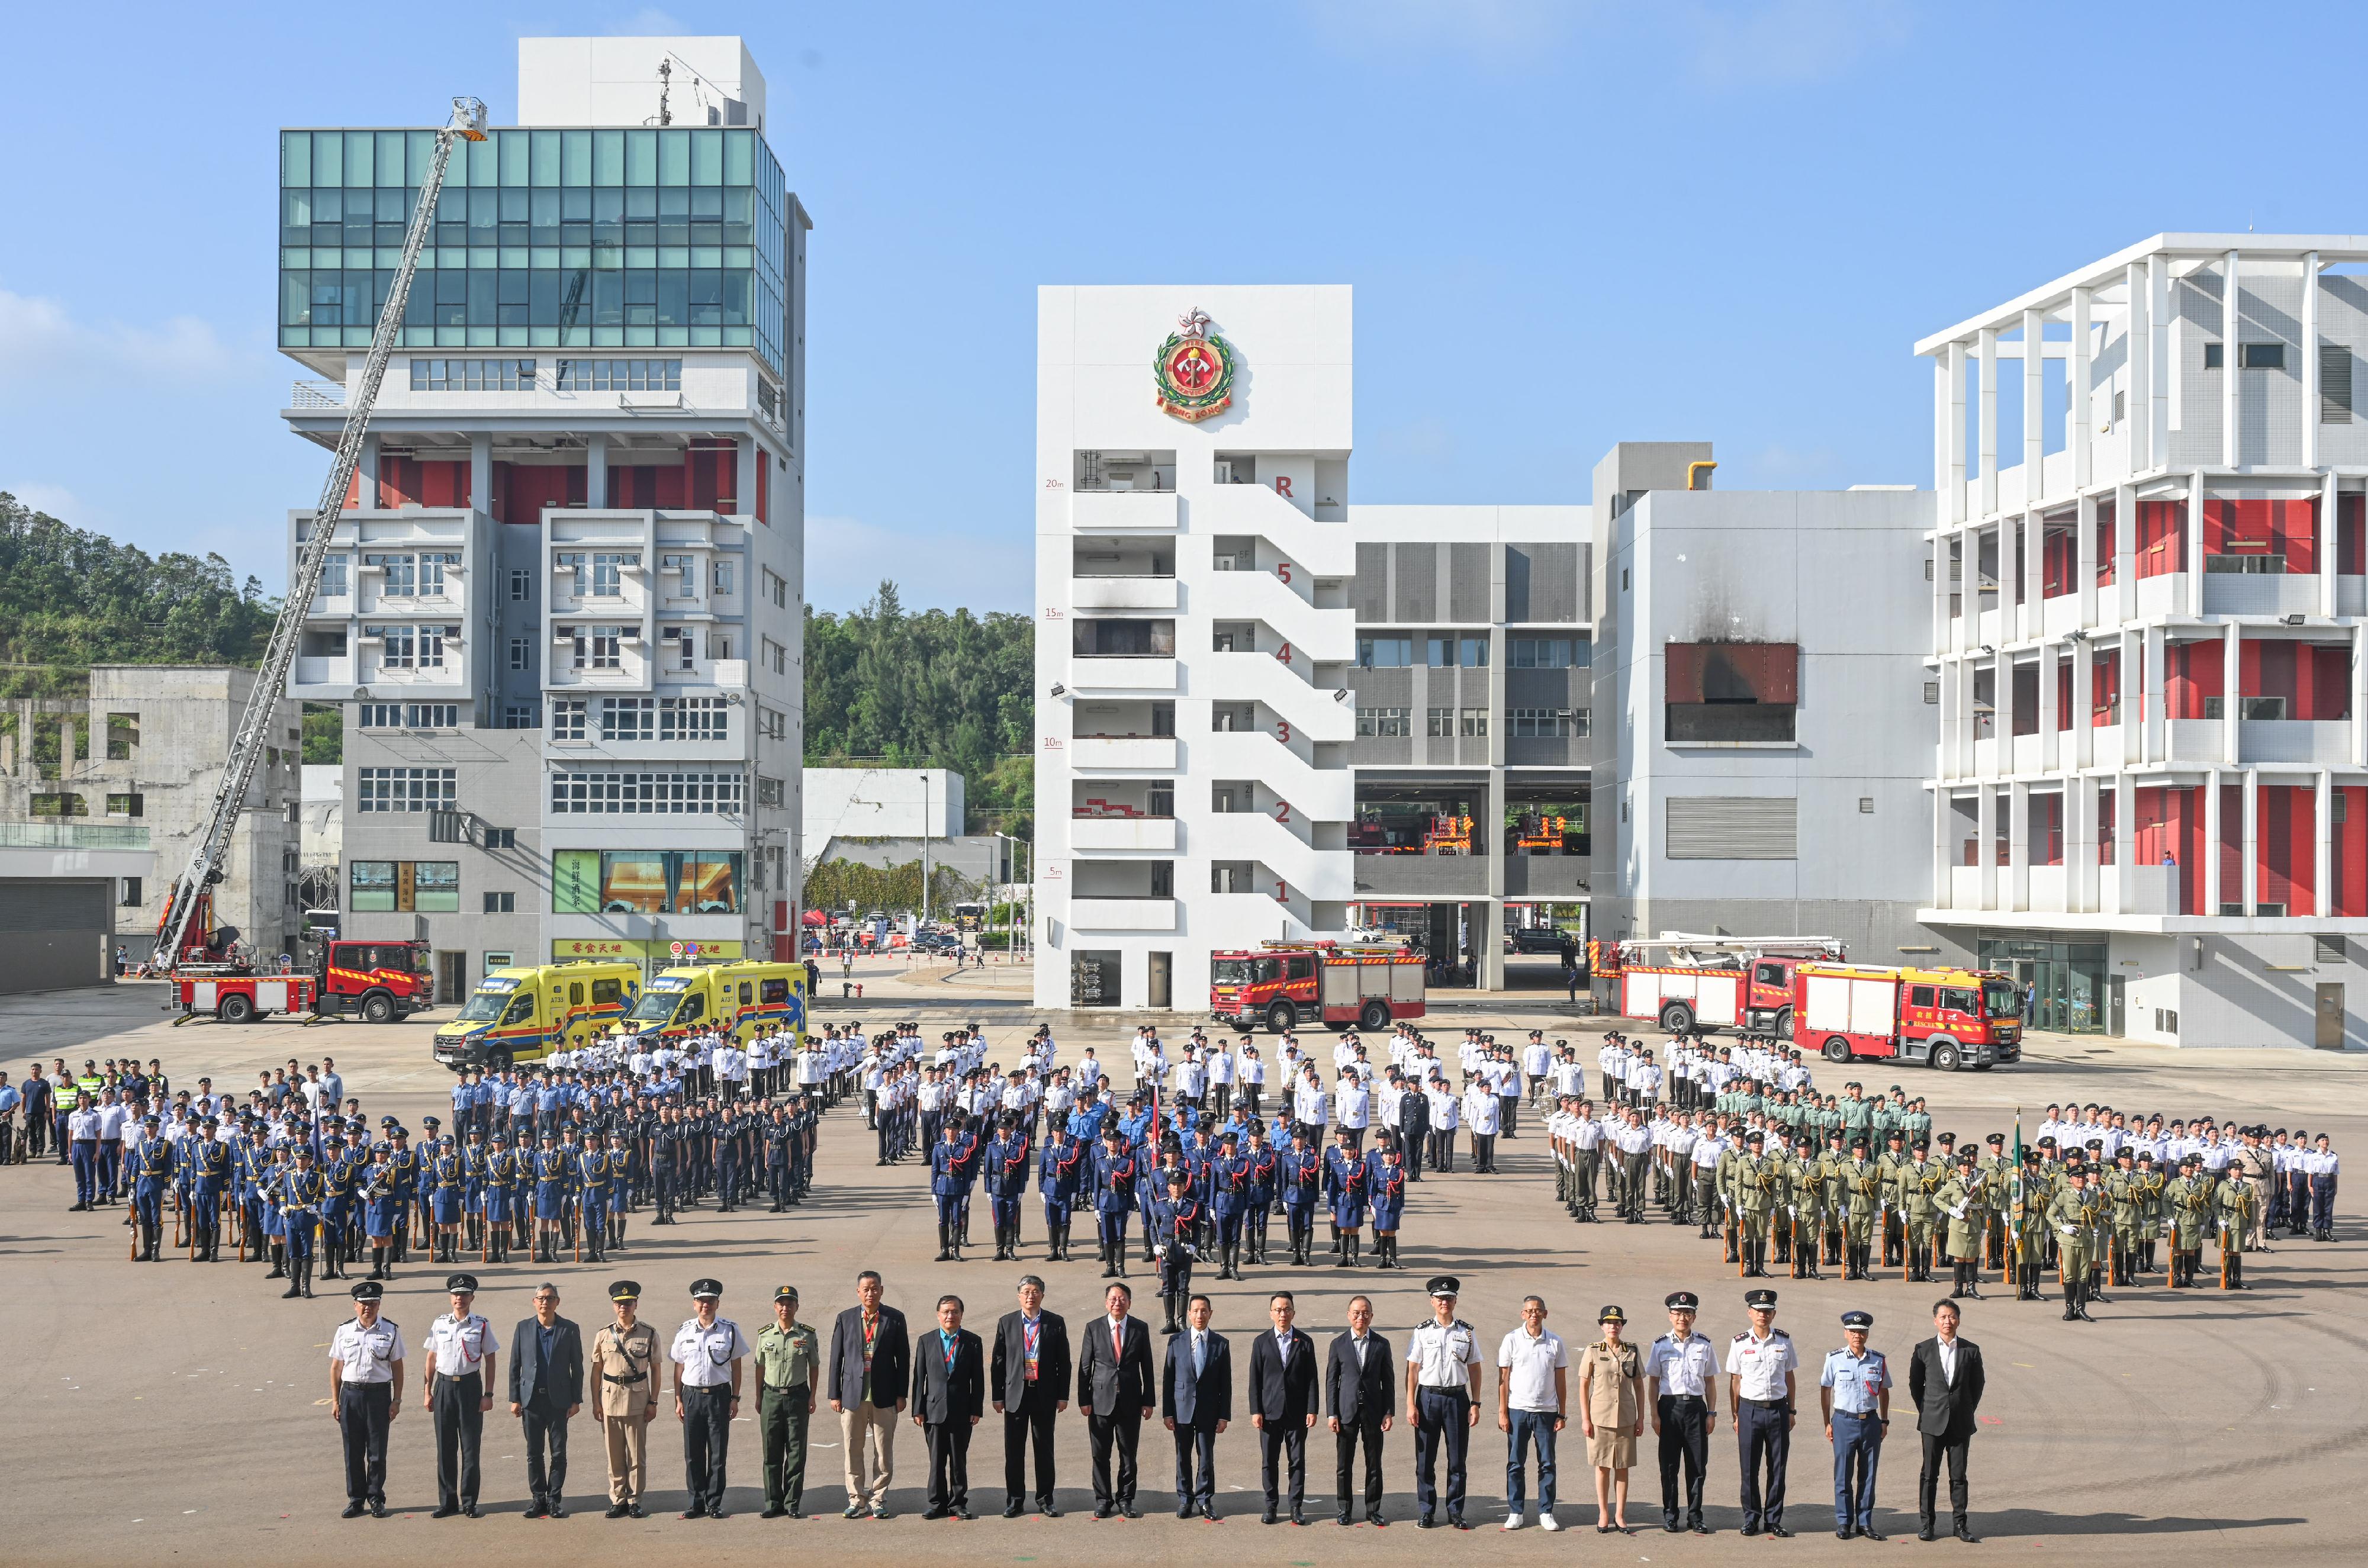 The Security Bureau led its disciplined services and auxiliary services,together with youth uniformed groups,to hold Parade by Disciplined Services and Youth Groups cum Carnival for Celebrating the 74th Anniversary of the Founding of the People's Republic of China (PRC) today(October 1) to celebrate the National Day with public.Photo shows (front row from left) Commandant of Hong Kong Auxiliary Police Force,Mr Yang Joe-tsi;Commissioner of Civil Aid Service,Mr Lo Yan-Lai;Under Secretary for Security,Mr Michael Cheuk;Commissioner of Correctional Services,Mr Wong Kwok-hing;Director of Immigration,Mr Benson Kwok;People’s Liberation Army Hong Kong Garrison Deputy Chief of Staff Mr Zhang Jun;Director of liaison office of Office for Safeguarding National Security of the CPG in the HKSAR,Mr Deng Jianwei;Deputy Commissioner of the Office of the Commissioner of the Ministry of Foreign Affairs of the PRC in the HKSAR,Mr Fang Jianming;Deputy Director of Liaison Office of the CPG in the HKSAR,Mr Luo Yonggang;Chief Secretary for Administration, Mr Chan Kwok-ki;officiating guest Mr Tang Yat-sun;Permanent Secretary for Security,Mr Patrick Li;Secretary for Constitutional and Mainland Affairs,Mr Erick Tsang Kwok-wai;Commissioner of Police,Mr Siu Chak-yee;Independent Commission Against Corruption Commissioner,Mr Woo Ying-ming;Commissioner of Customs and Excise,Ms Louise Ho;Commissioner of Auxiliary Medical Service,Dr Ronald Lam;Director of Fire Services,Mr Andy Yeung;Controller of Government Flying Service, Captain West Wu,and Director of Broadcasting, Mr Eddie Cheung;and performers at event.